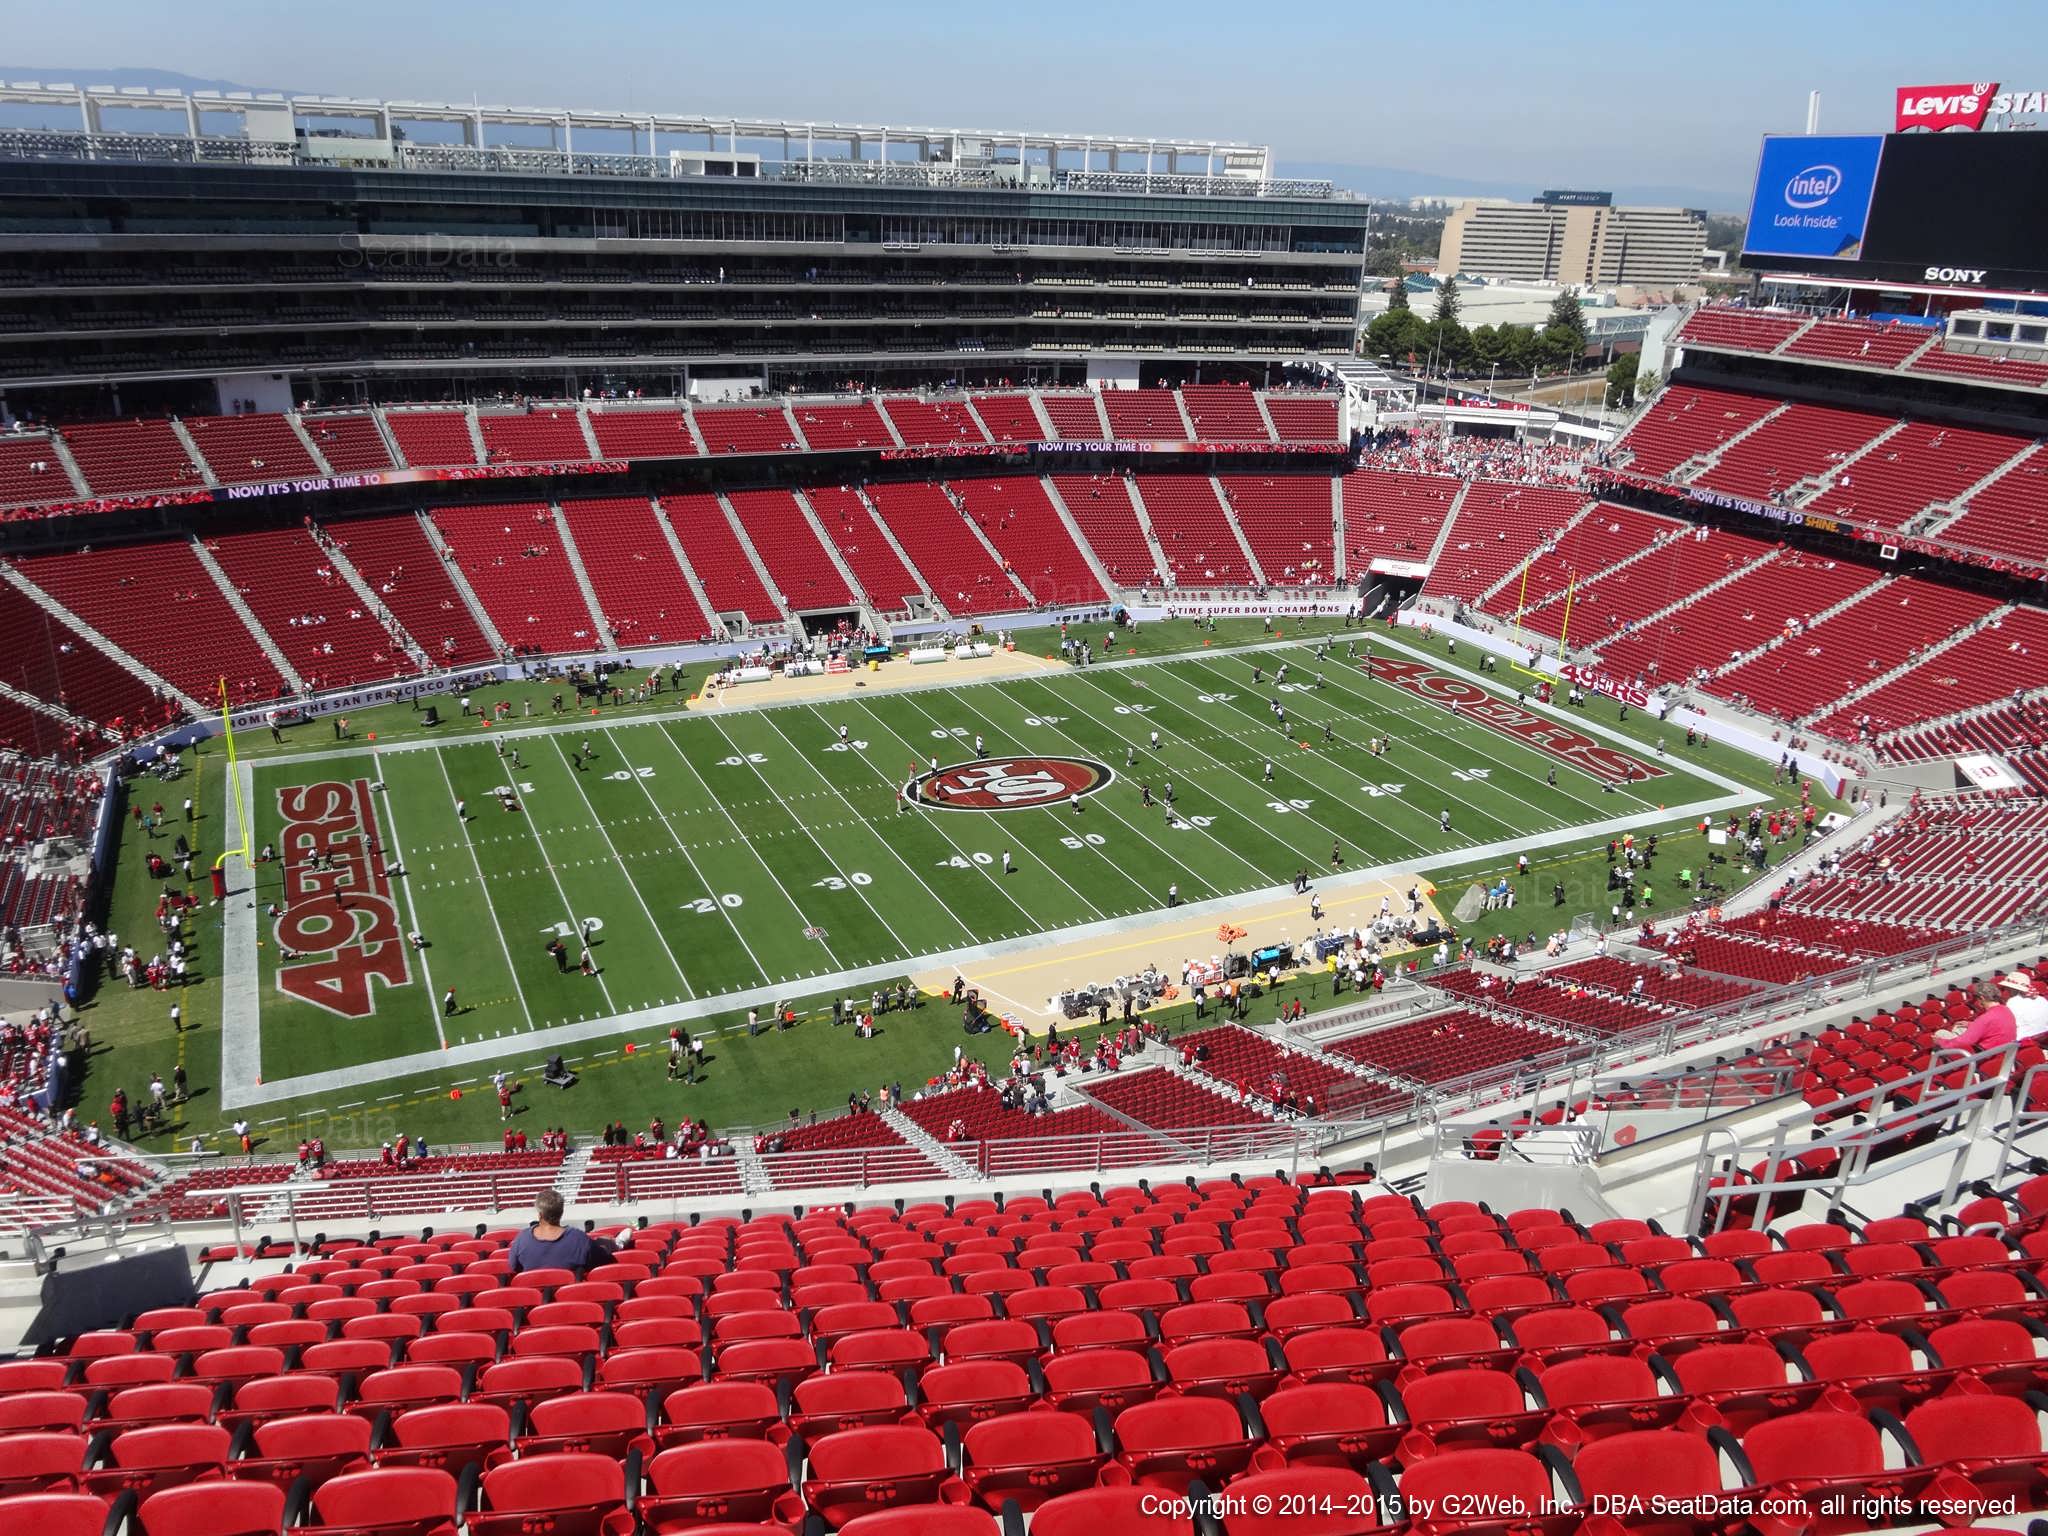 Seat view from section 415 at Levi’s Stadium, home of the San Francisco 49ers